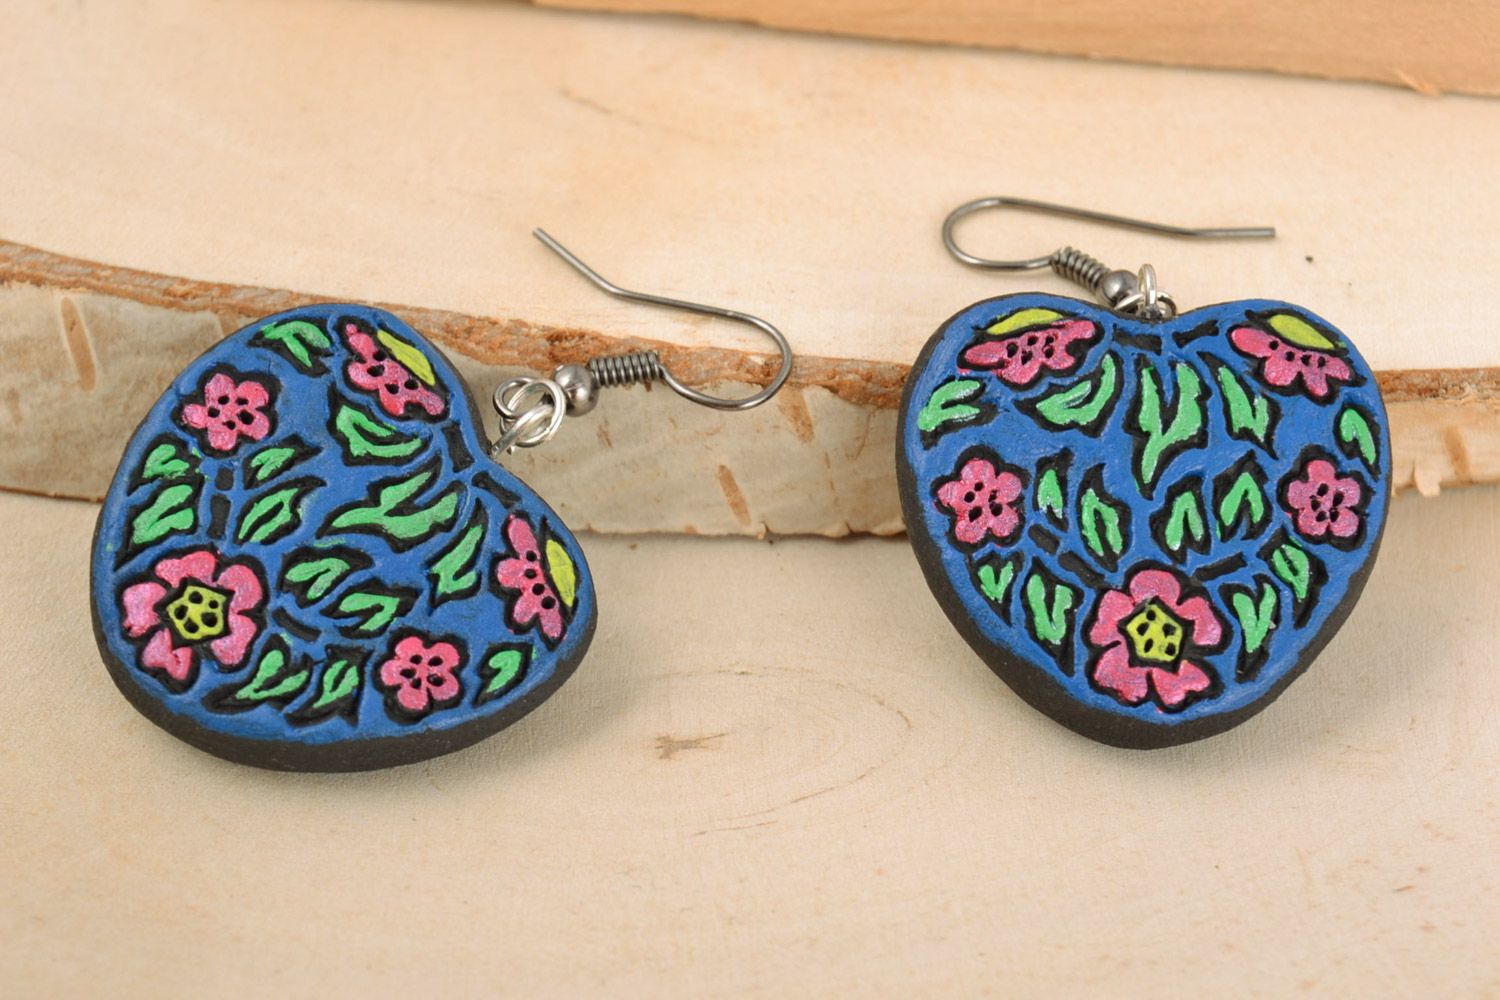 Handmade heart-shaped painted blue ceramic dangling earrings with floral pattern photo 1